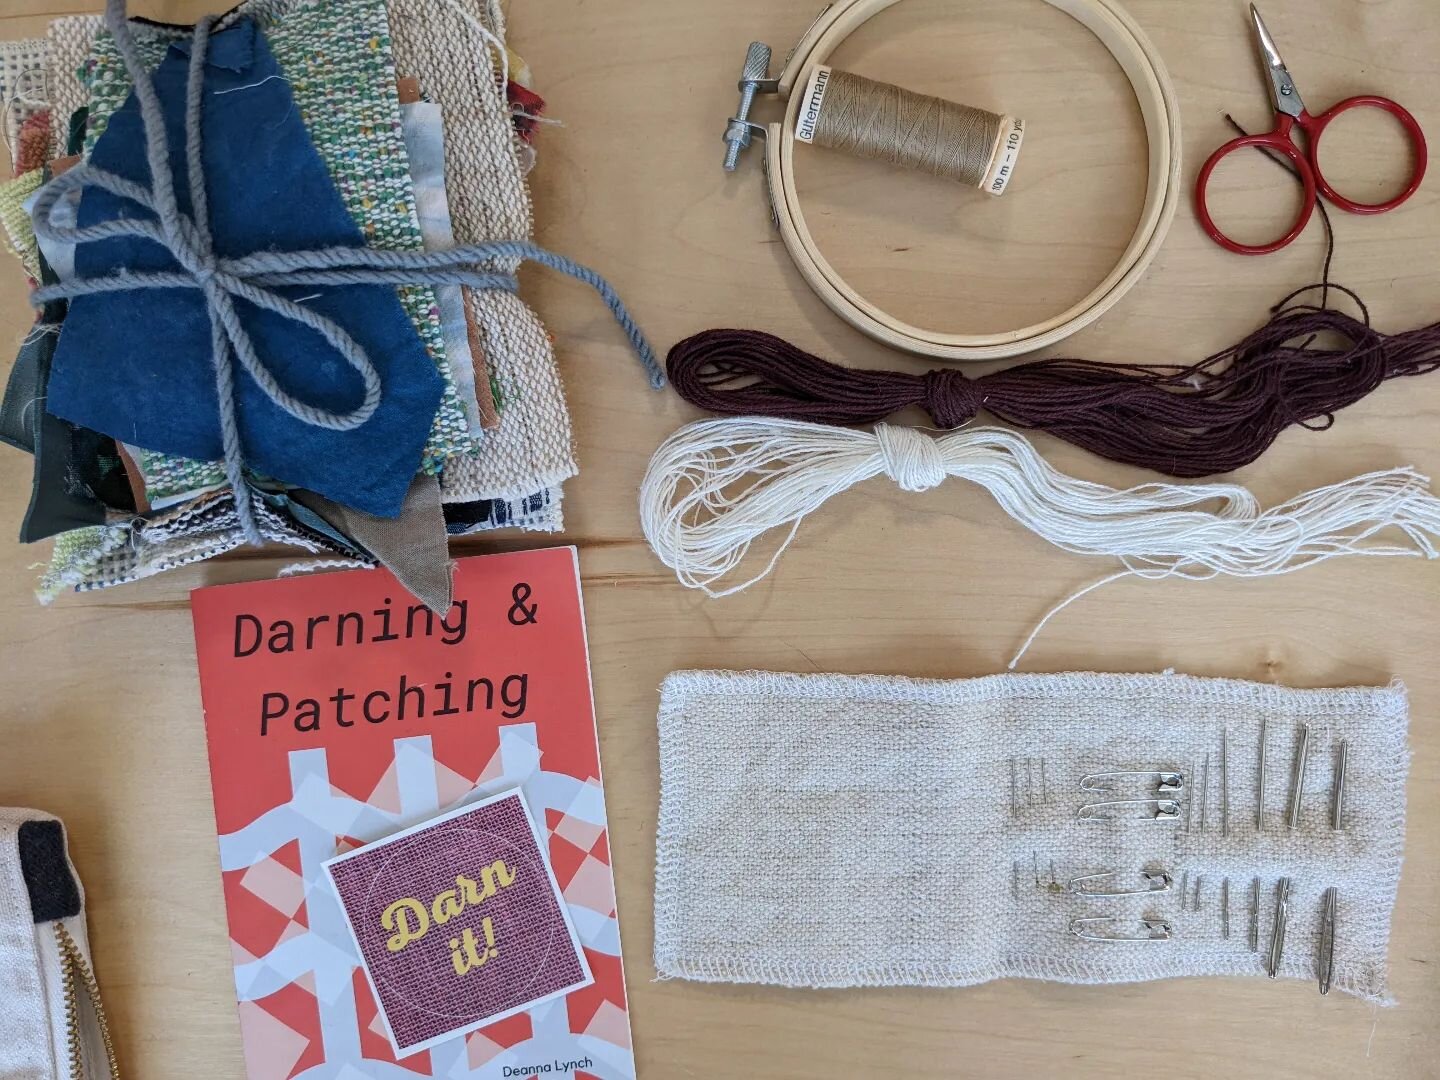 I'm so excited about these mending kits going to @bostongeneralstore ! I made special zipper pouches for them to hold all the tools and patches and there's still room for you to fit MORE patches or a darning egg. The pouch is naturally colored cotton